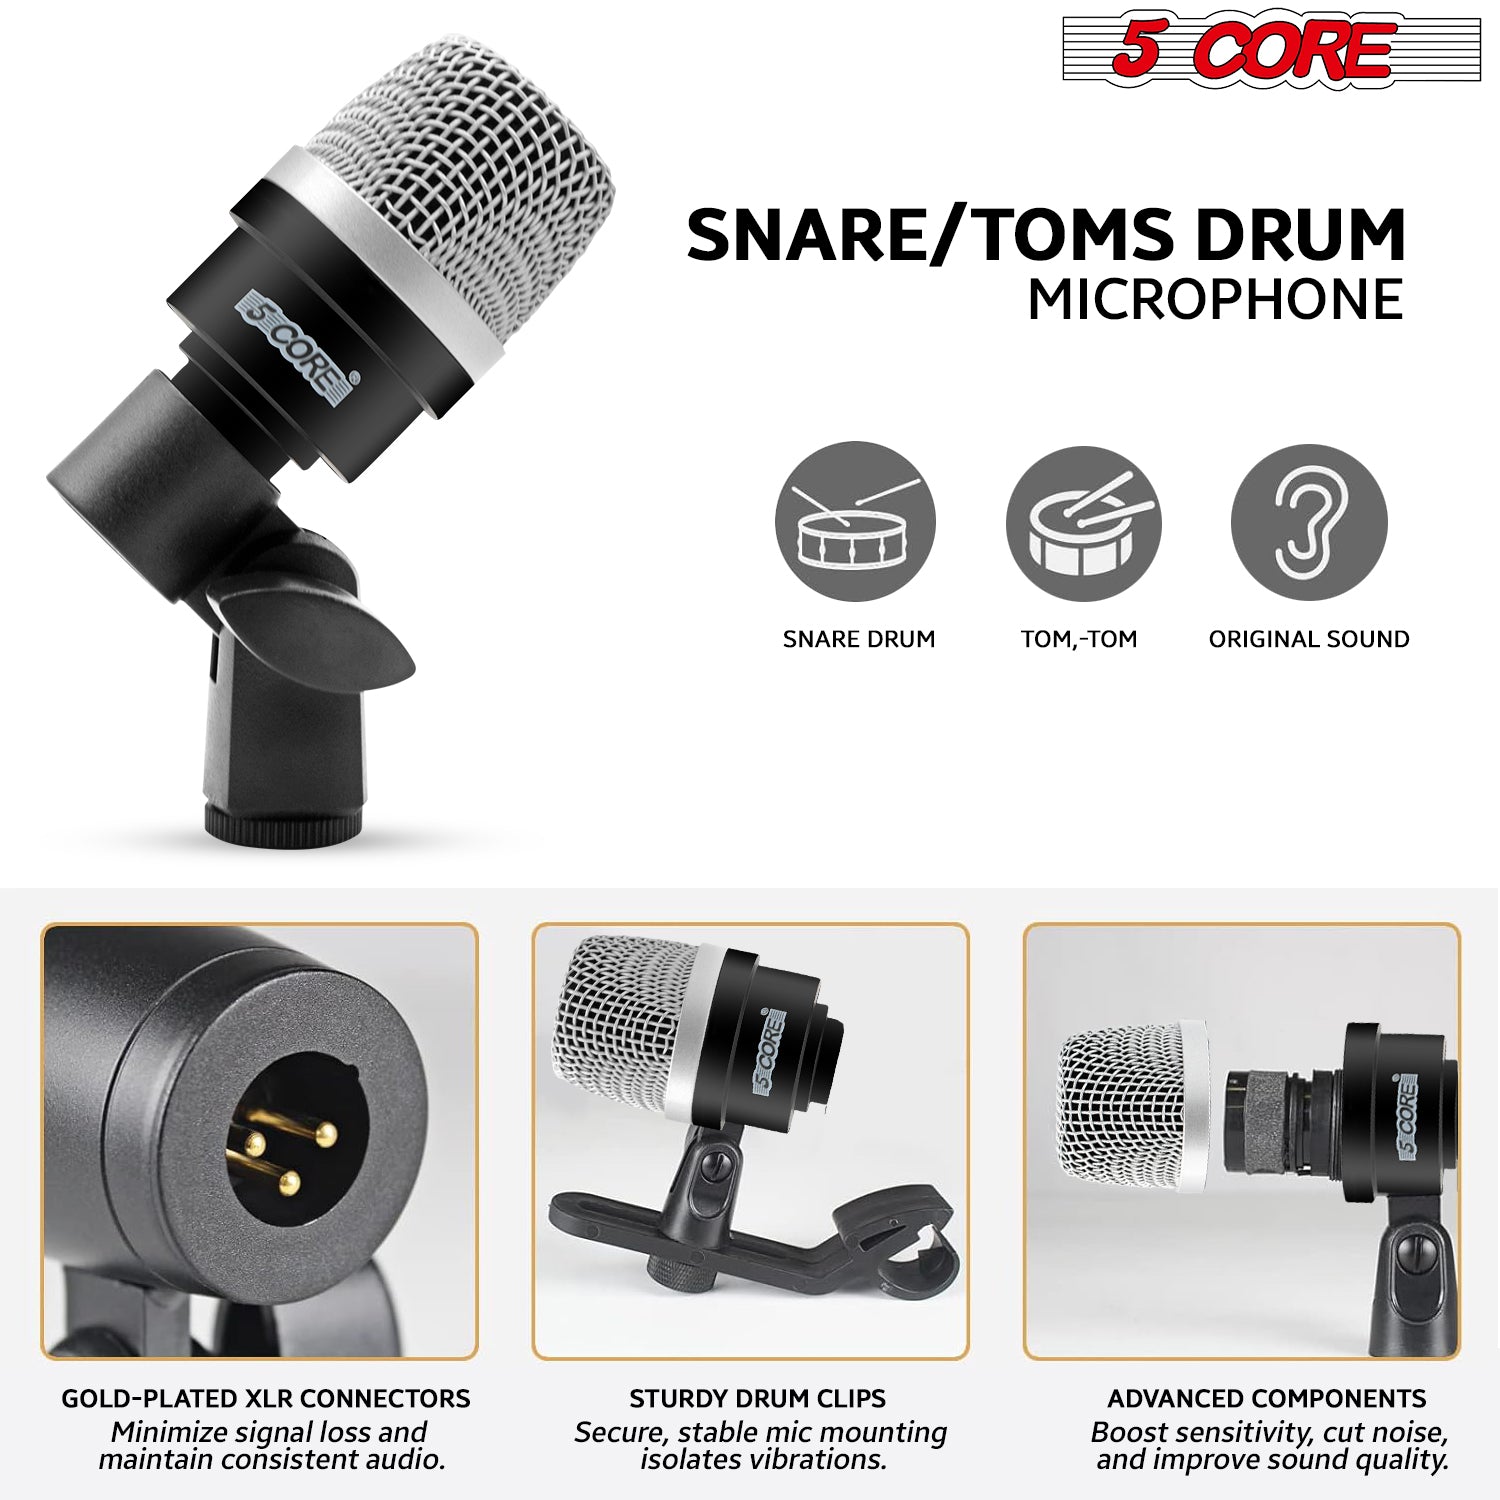 included snare/tom drum mic